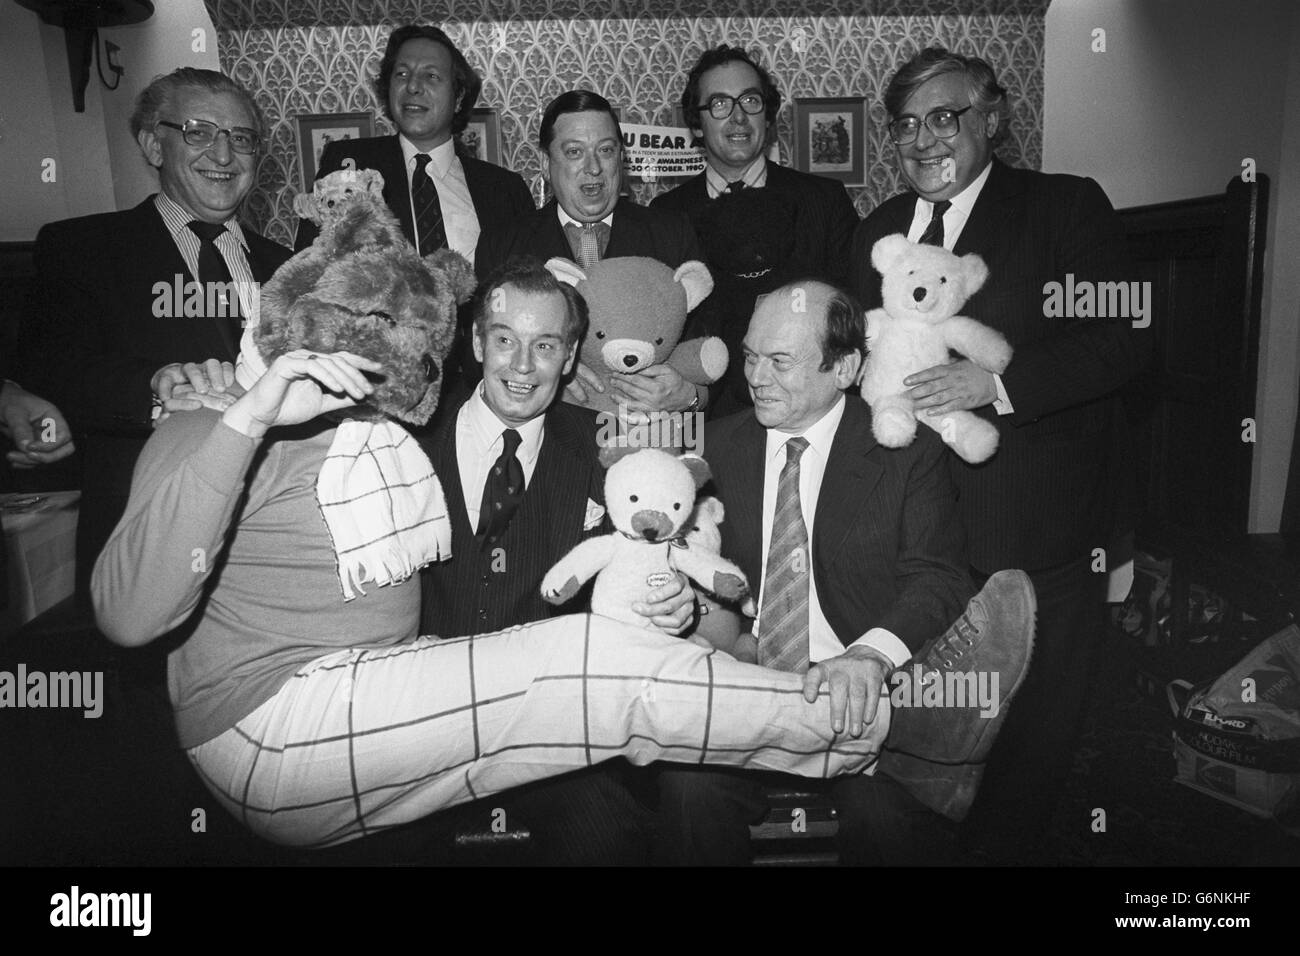 British MPs with 'Robert Bear' attend a Good Bears of the World charity reception at the House of Commons in Westminster, London. (Back row, from l-r) Wyn Roberts, Parliamentary Under-Secretary of State for Wales and MP for Conway; Ian Grist, MP for Cardiff North; Michael Brotherton, MP for Louth; Robin Squire, MP for Hornchurch; and Donald Thompson, MP for Sowerby. The man dressed up as Rupert Bear lies across the laps of Michael Roberts (r), Parly Under-Secretary of State for Wales and MP for Cardiff North West, and David Bevan, MP for Birmingham Yardley. The first teddy bear had a Stock Photo